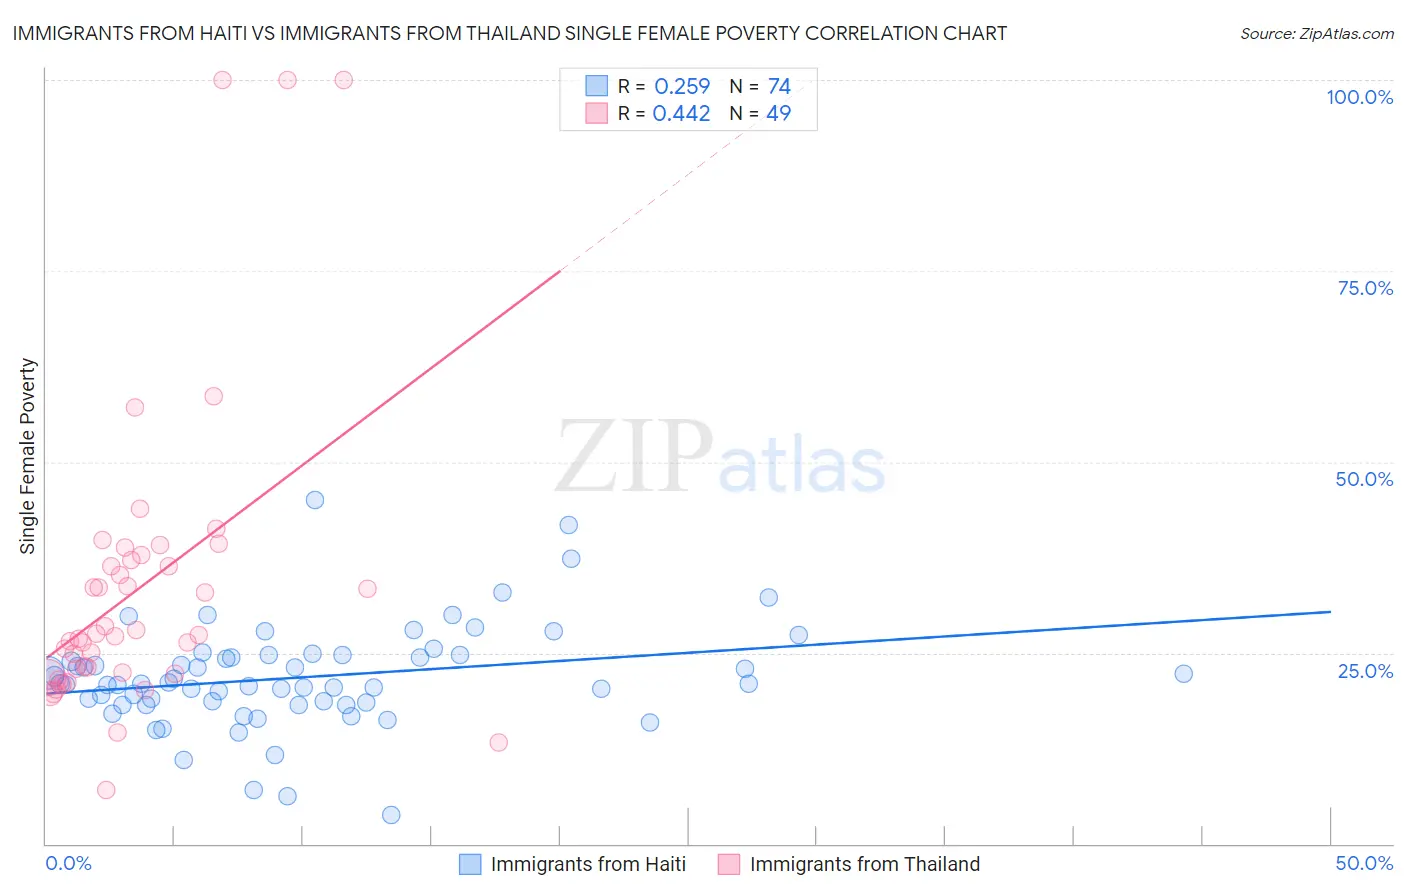 Immigrants from Haiti vs Immigrants from Thailand Single Female Poverty